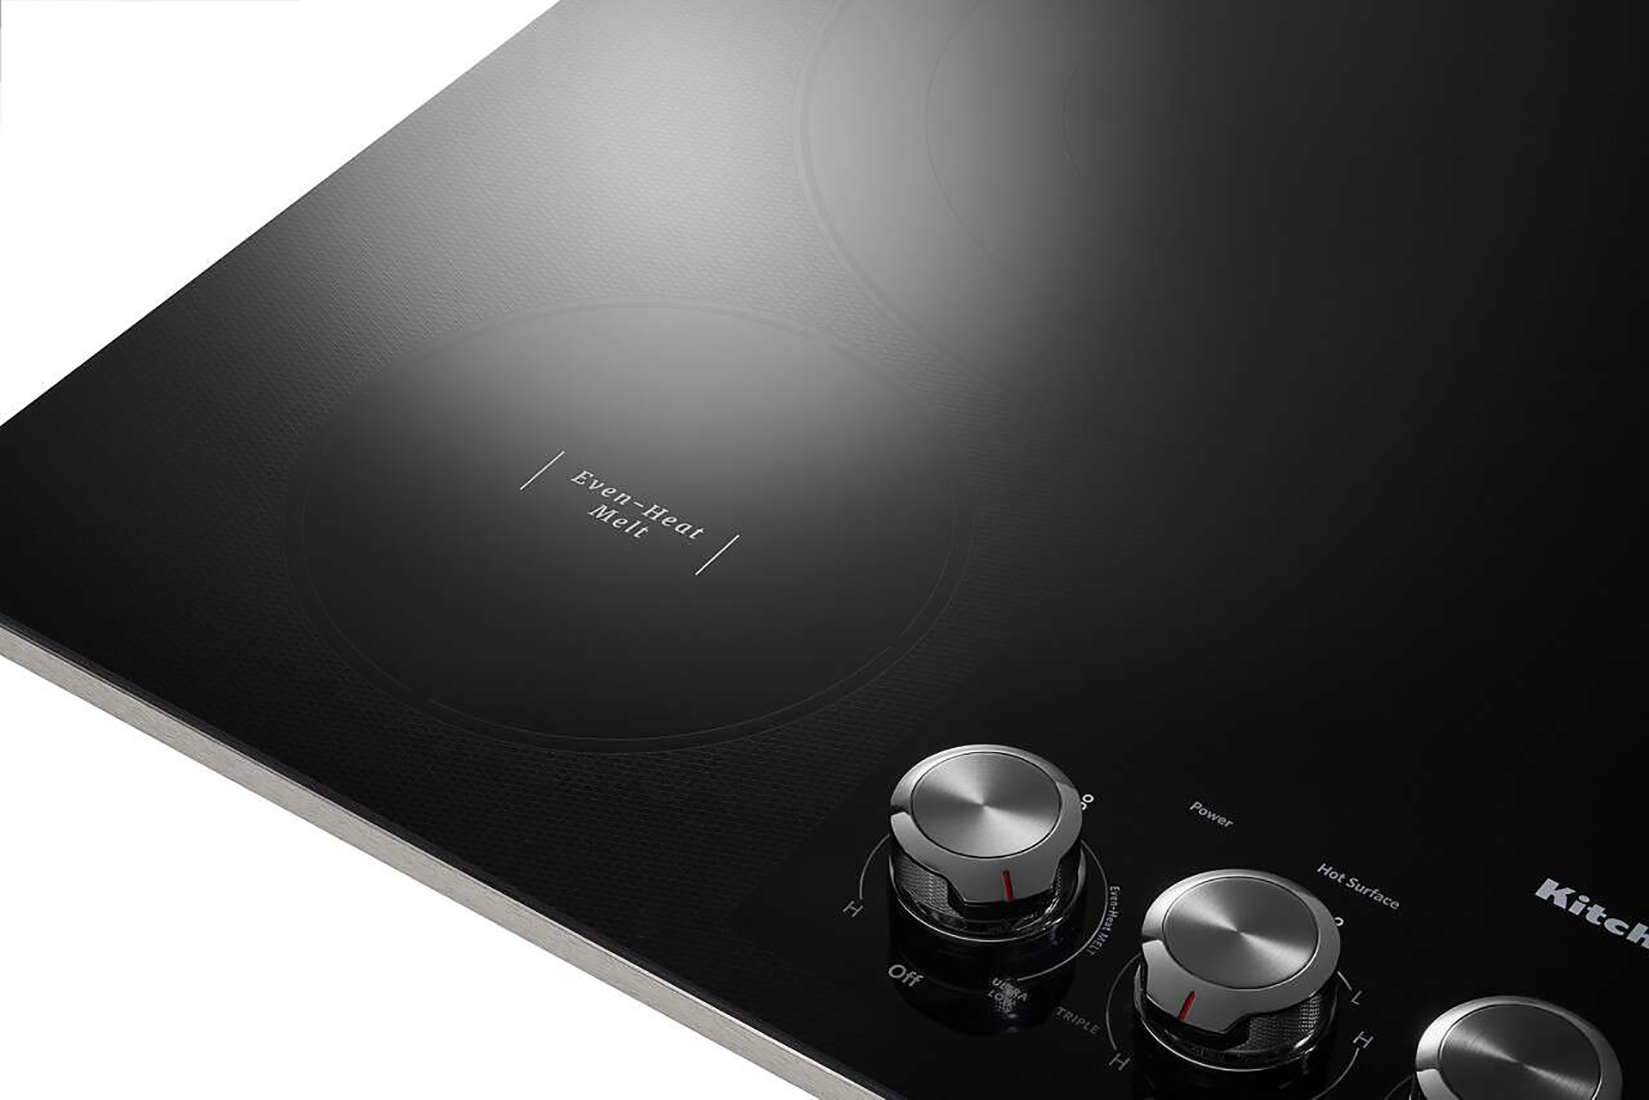 KitchenAid 36-inch Built-in Electric Cooktop with Even-Heat™ Ultra Pow